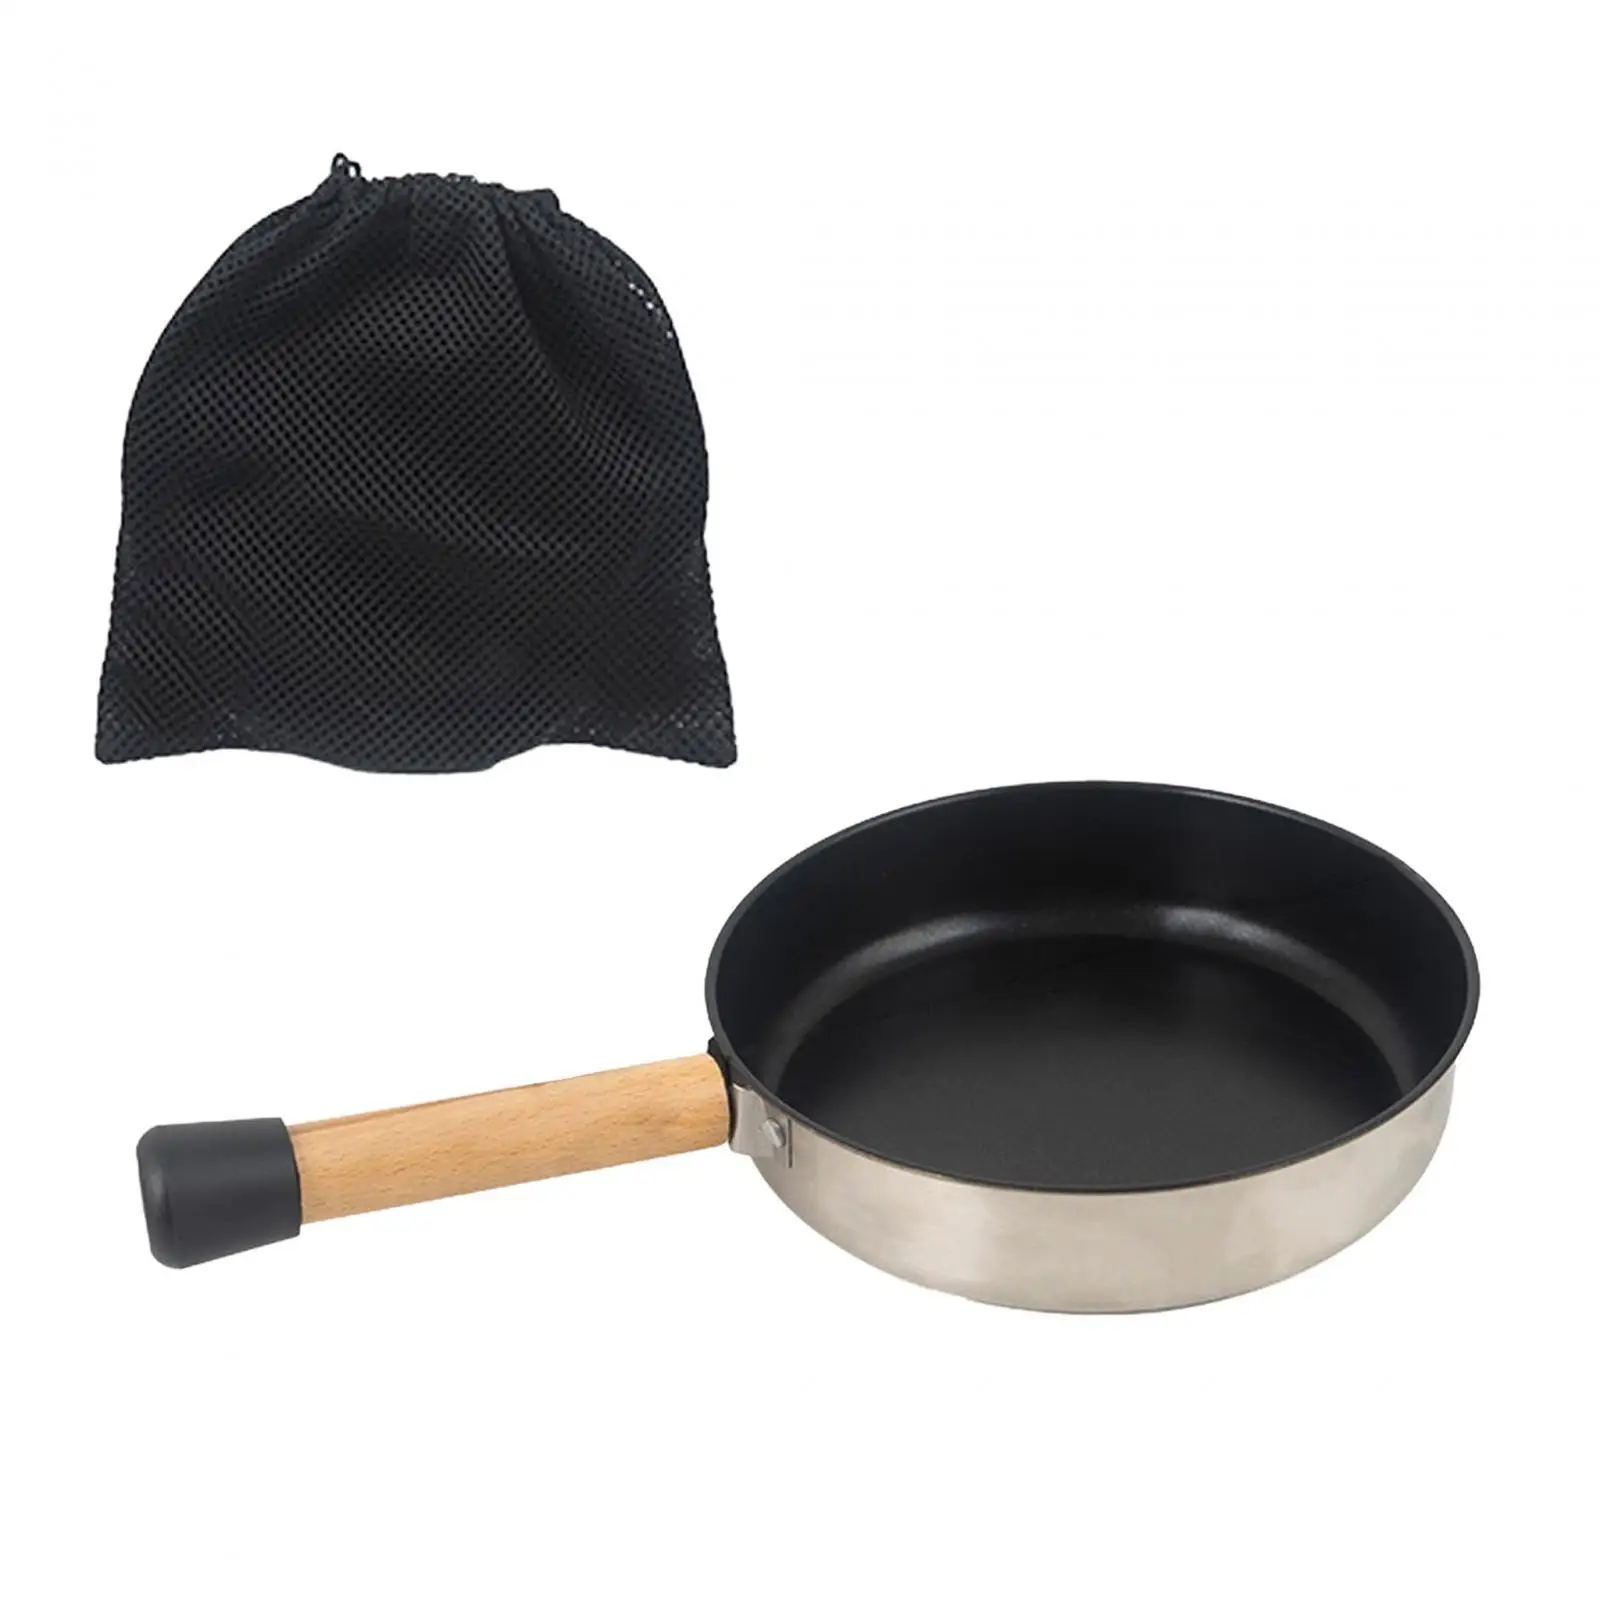 Camping Frying Pan Kitchen Cookware Nonstick Flat Griddle Pan with Wooden Handle